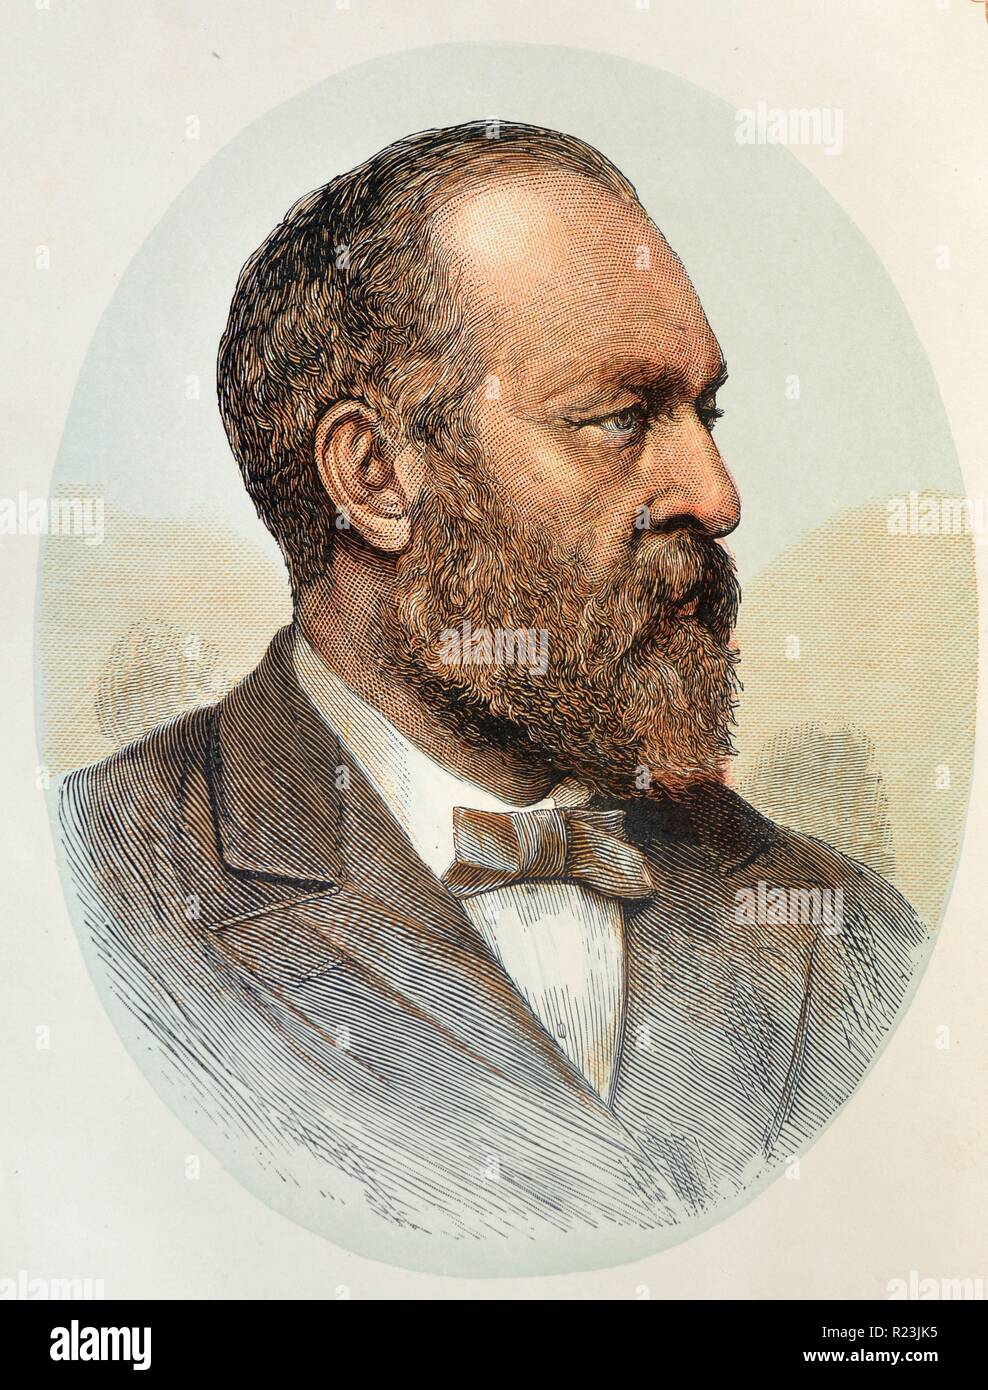 Colour portrait of James Garfield (1831-1881), 20th President of the United States of America. Dated 1881 Stock Photo